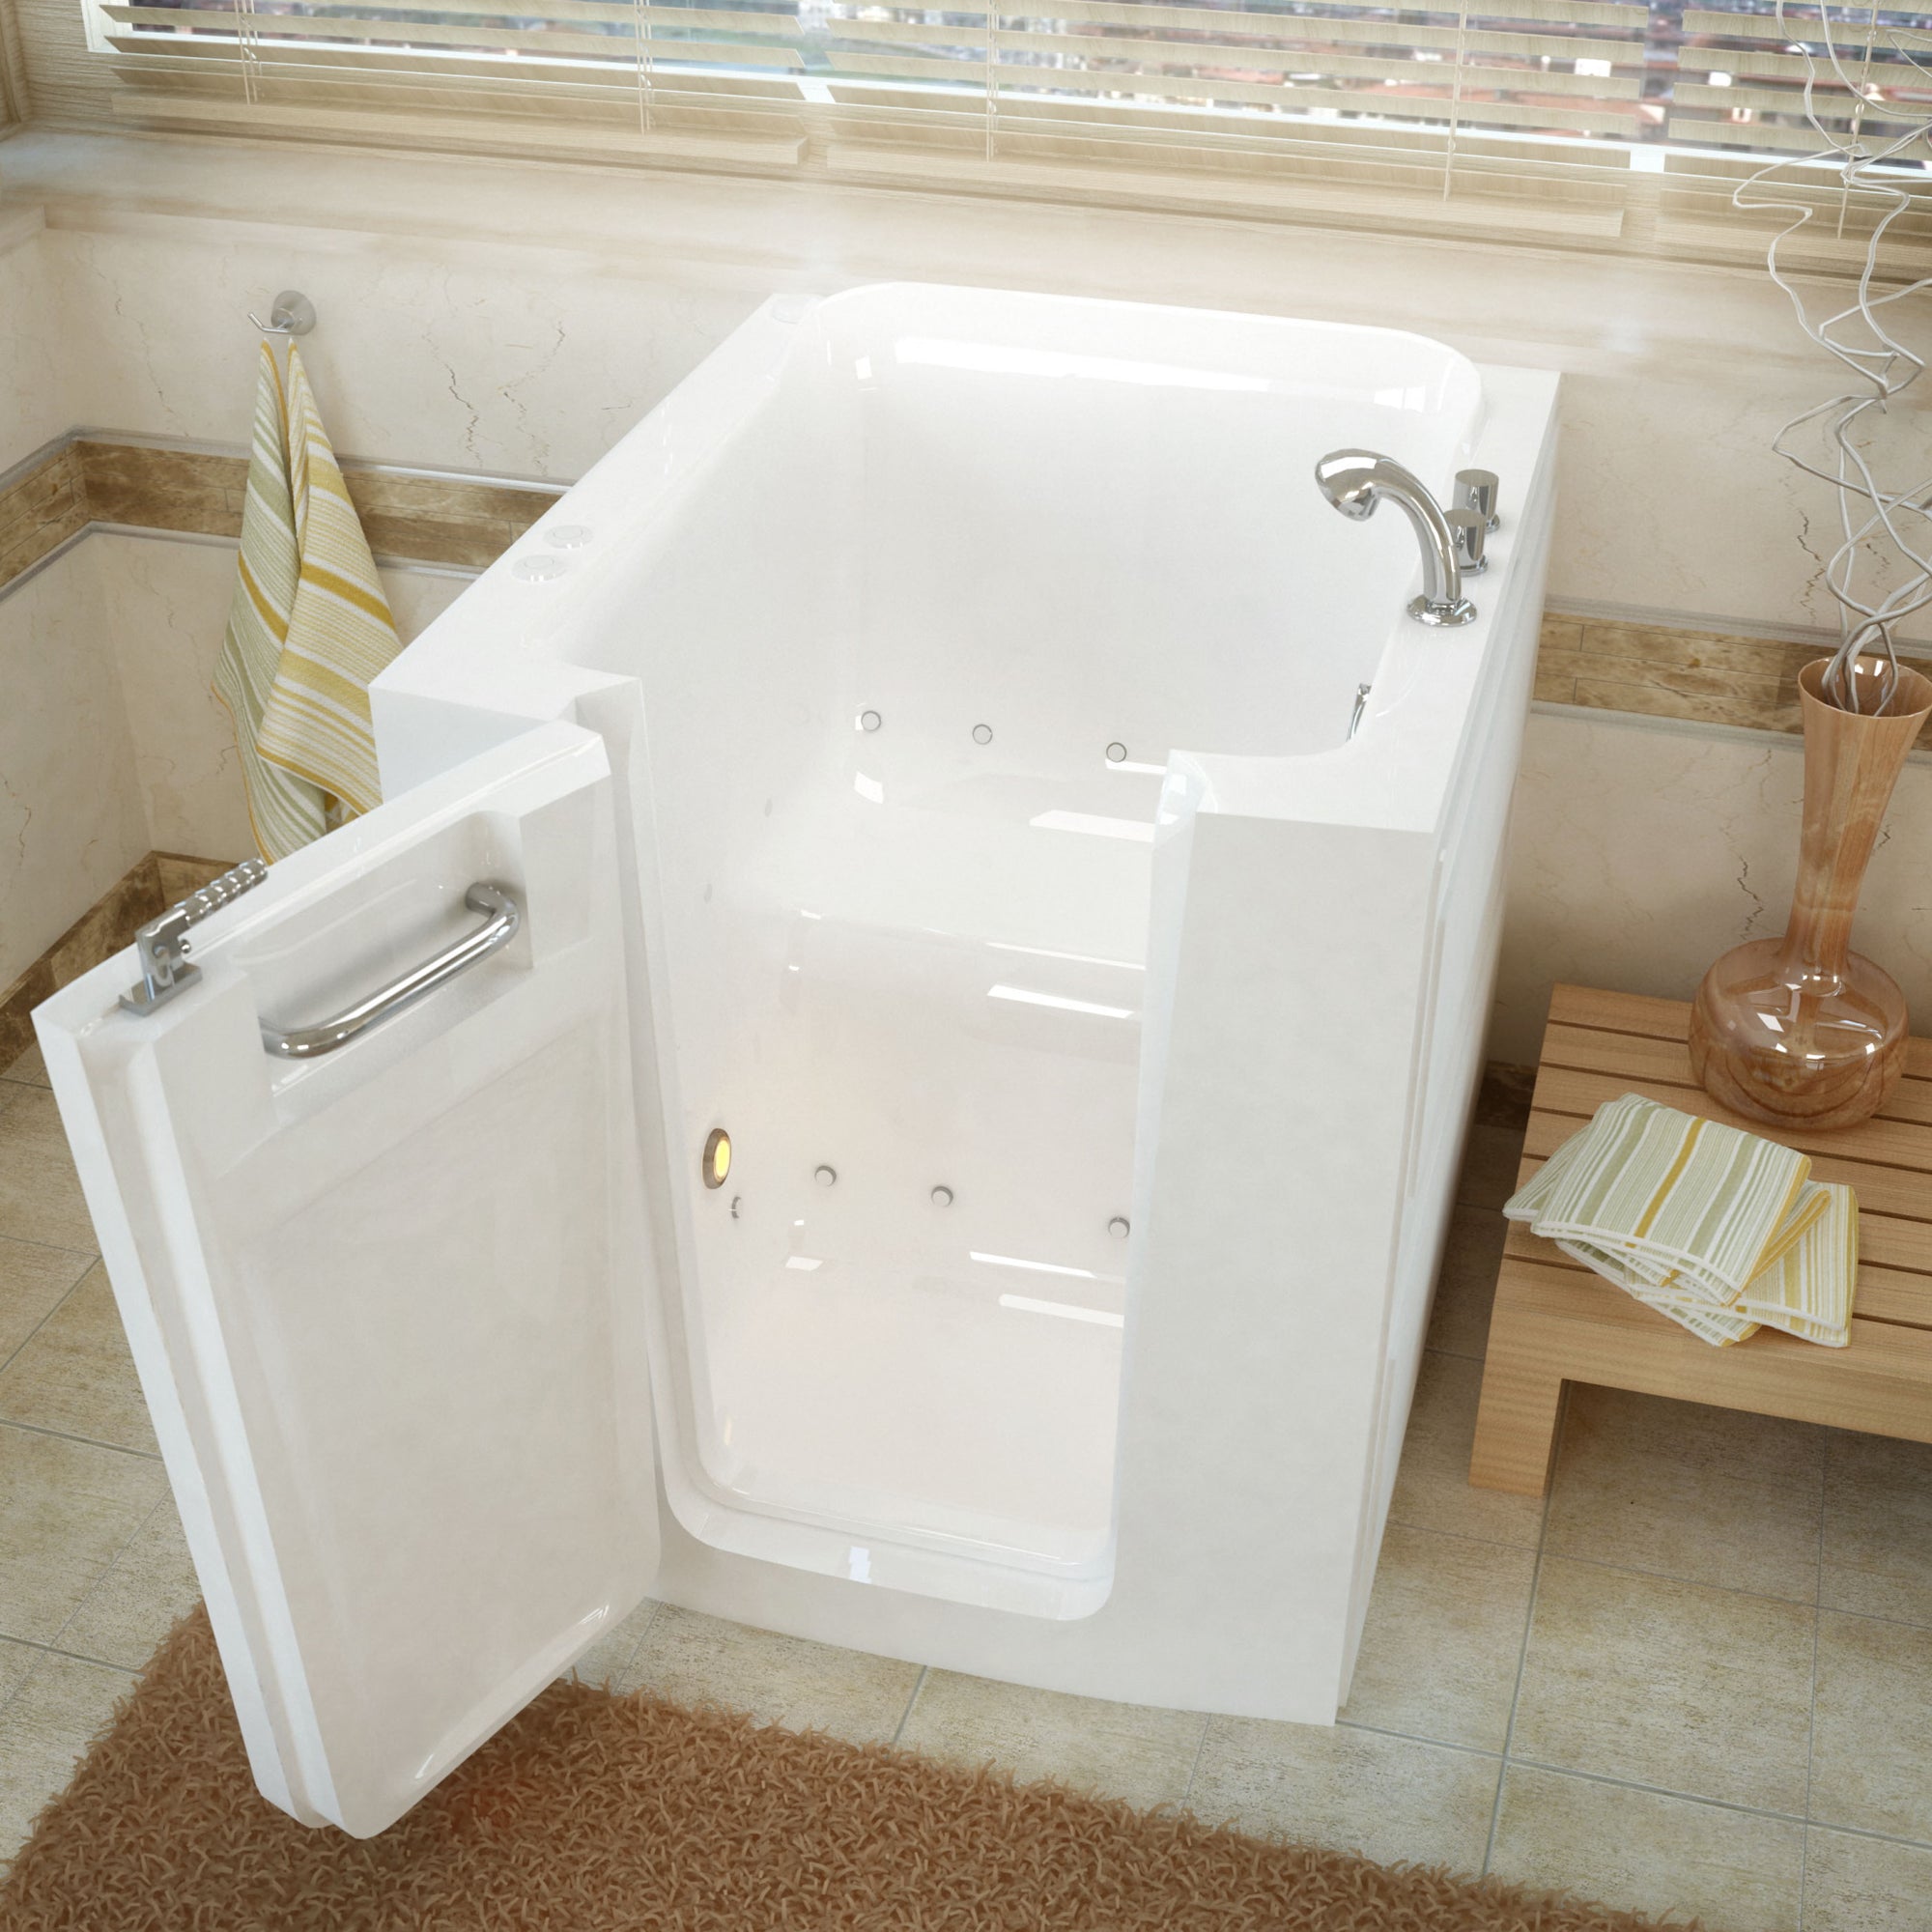 Meditub 32 x 38 White Walk-In Bathtub - High-grade marine fiberglass with acrylic coating - Outward swinging door - Left door - with 3.5 in. Threshold & 15 in. Seat Height, built-in grab bar - Air Jetted - Lifestyle - 3238 - Vital Hydrotherapy